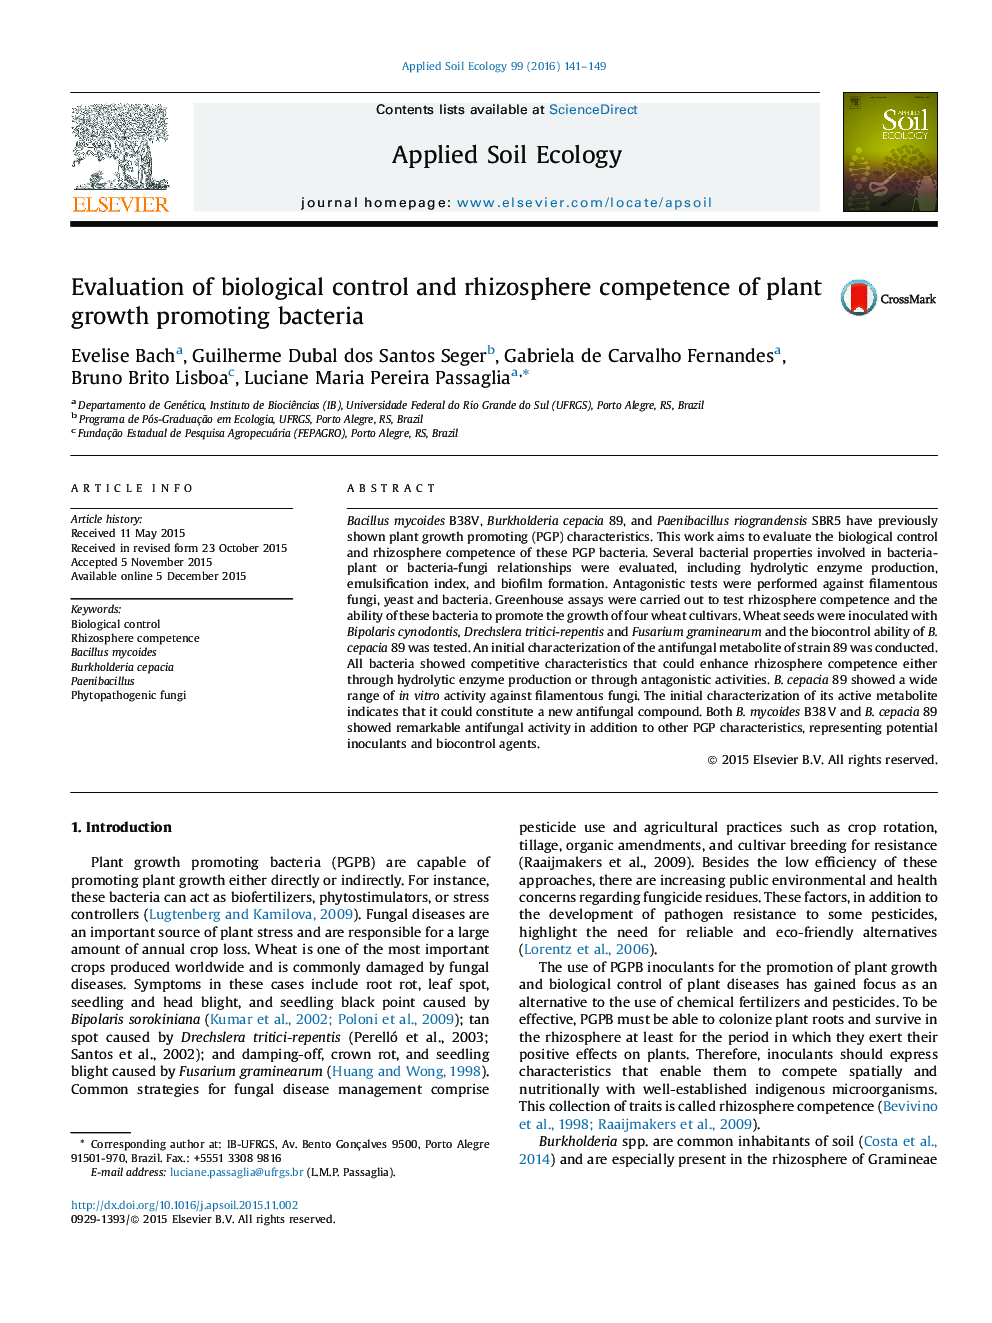 Evaluation of biological control and rhizosphere competence of plant growth promoting bacteria